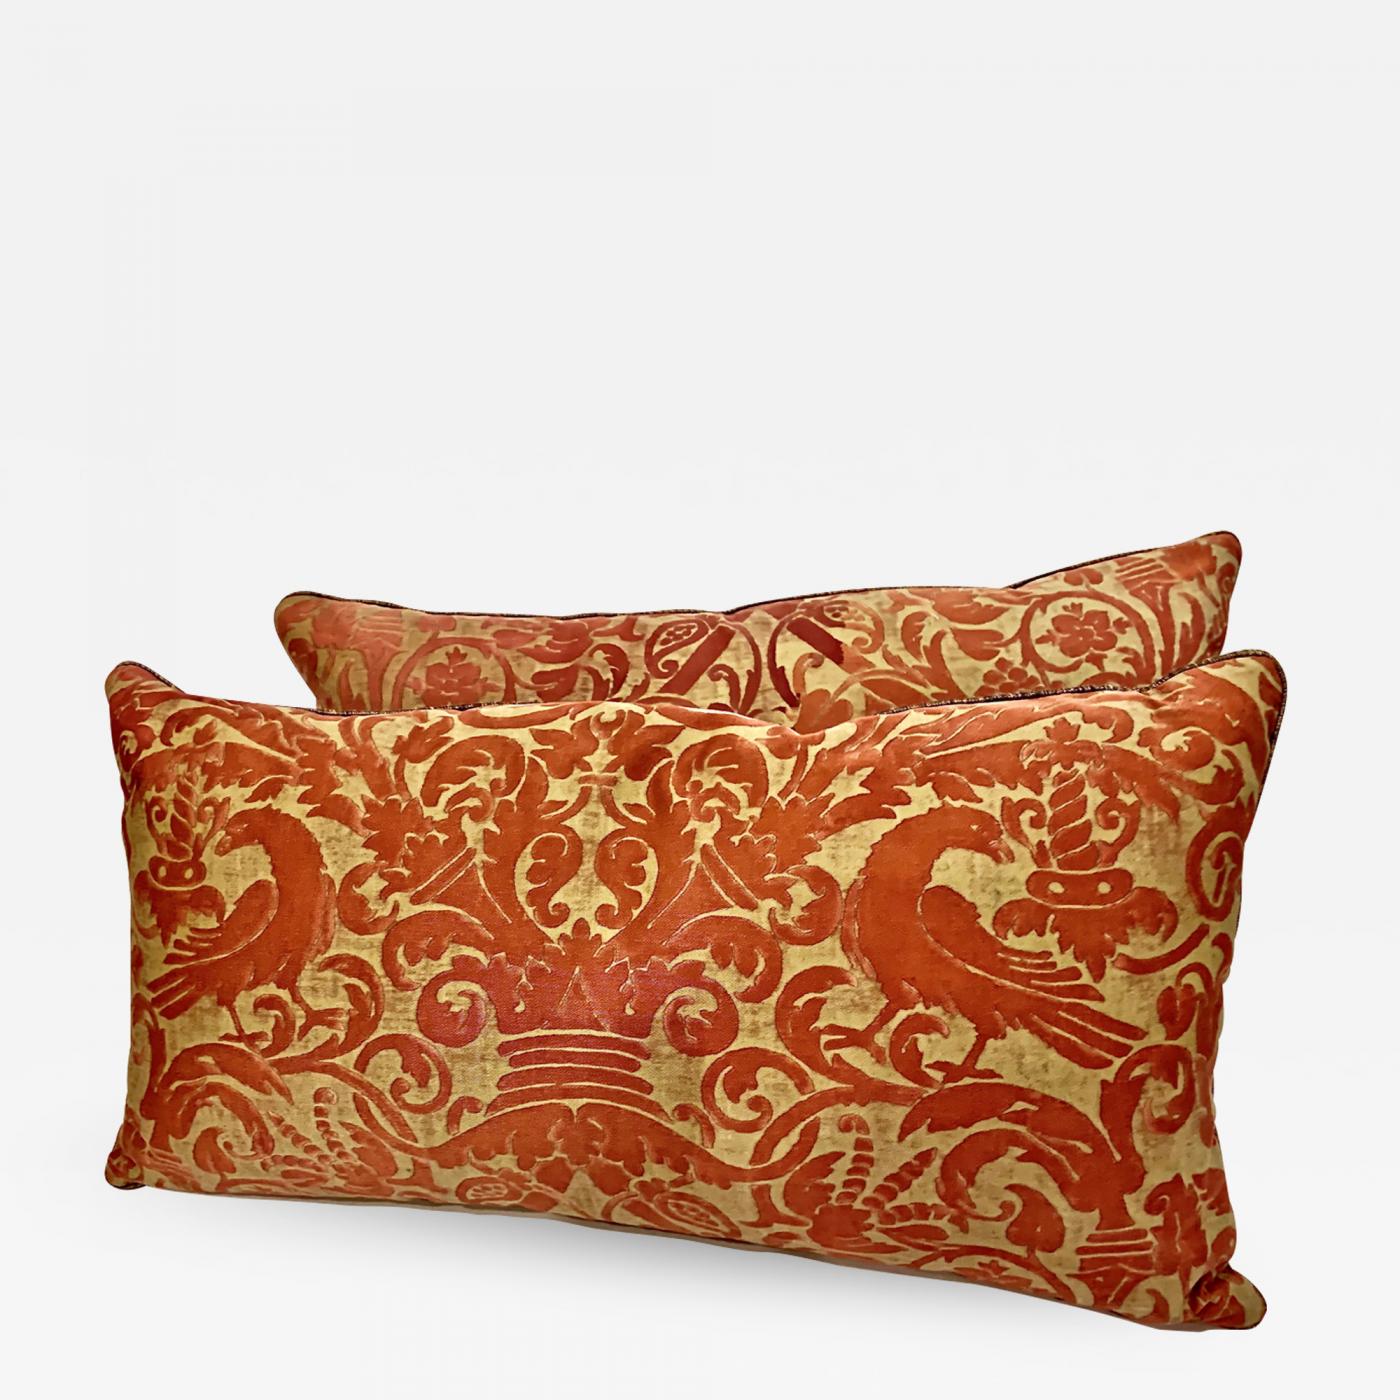 Free download Mariano Fortuny Pair antique Fortuny Pillows c 1925 1930 ...